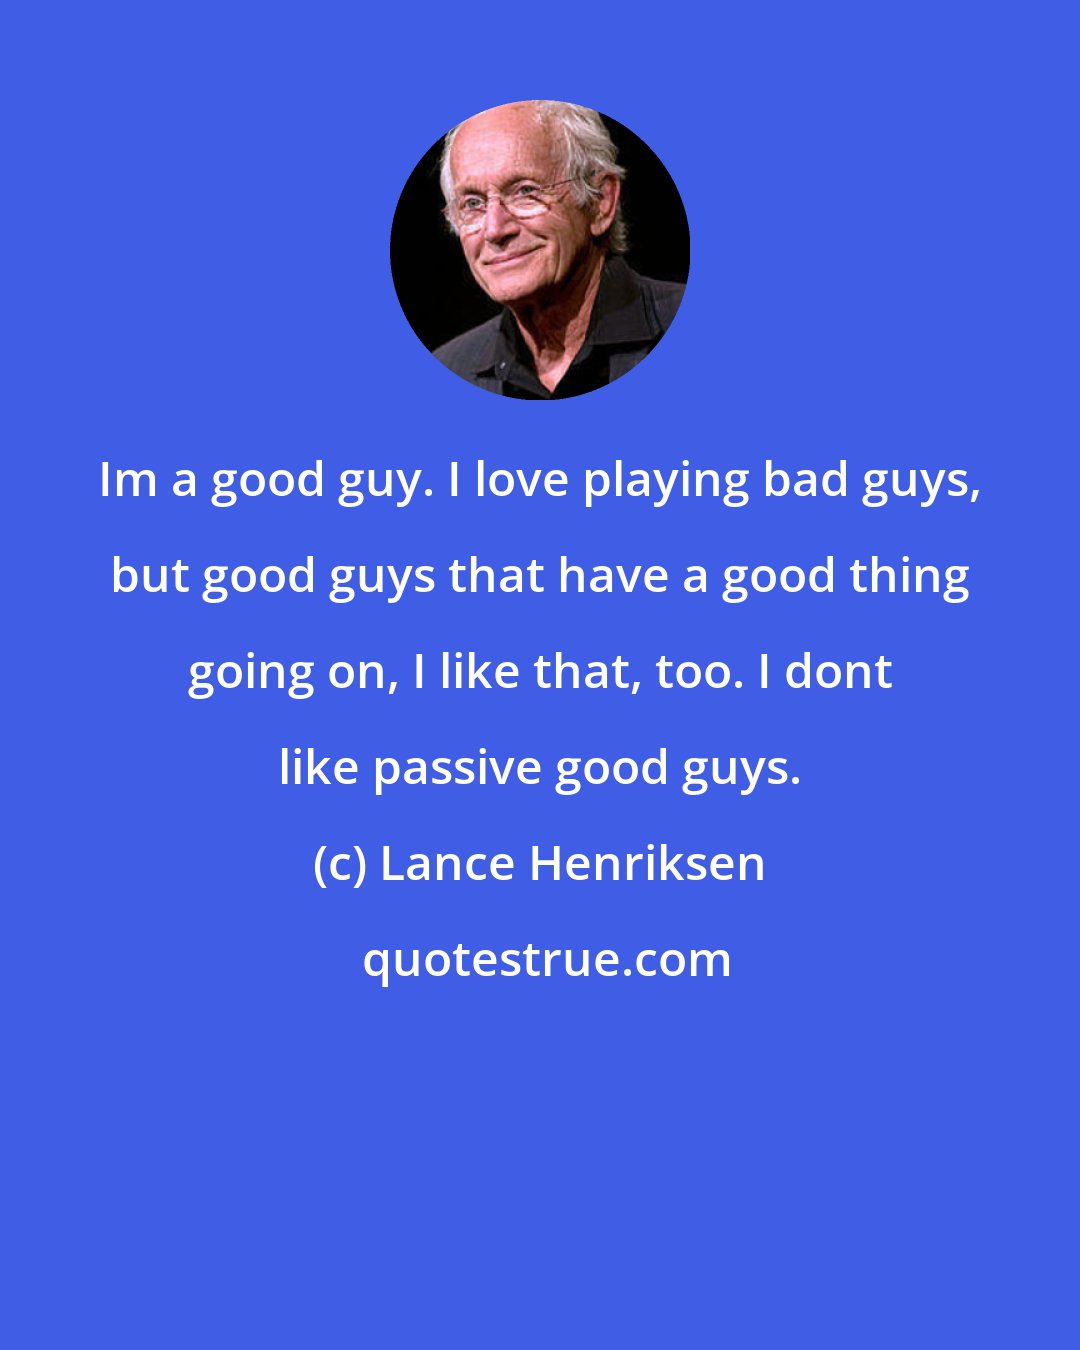 Lance Henriksen: Im a good guy. I love playing bad guys, but good guys that have a good thing going on, I like that, too. I dont like passive good guys.